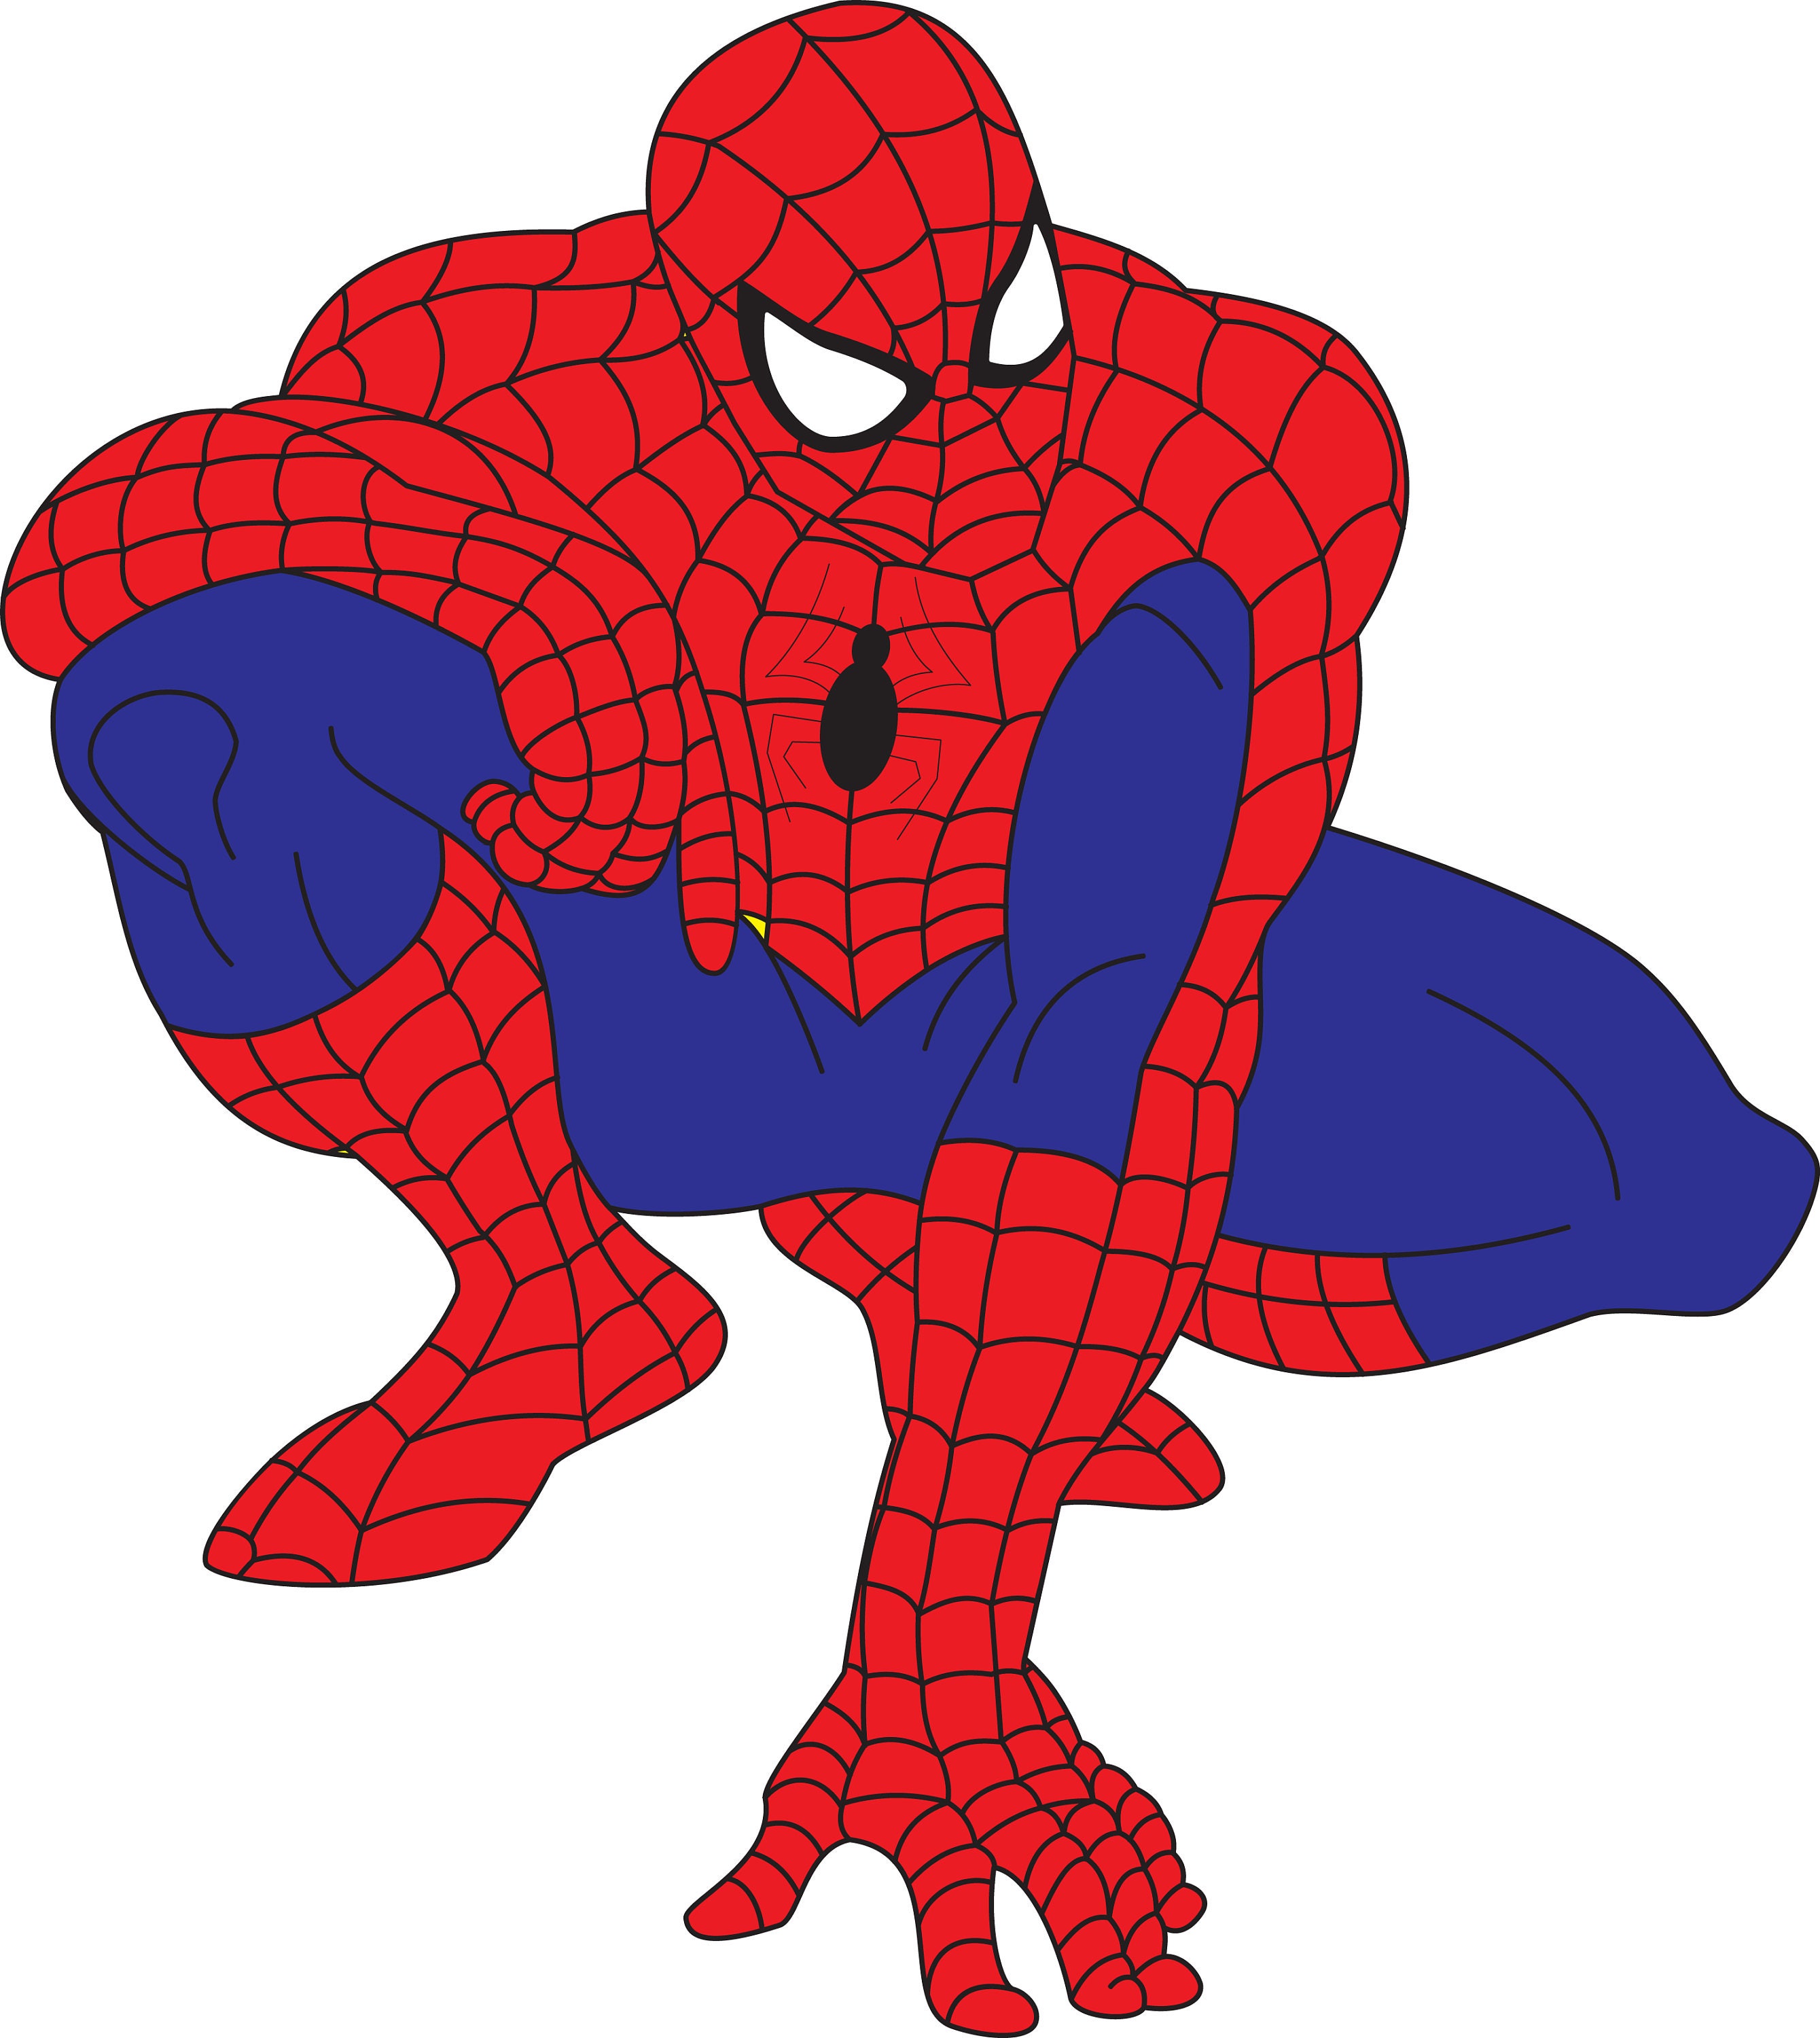 Spiderman #1 Svg/Eps/Png/Jpg/Cliparts,Printable, Silhouette and Cricut